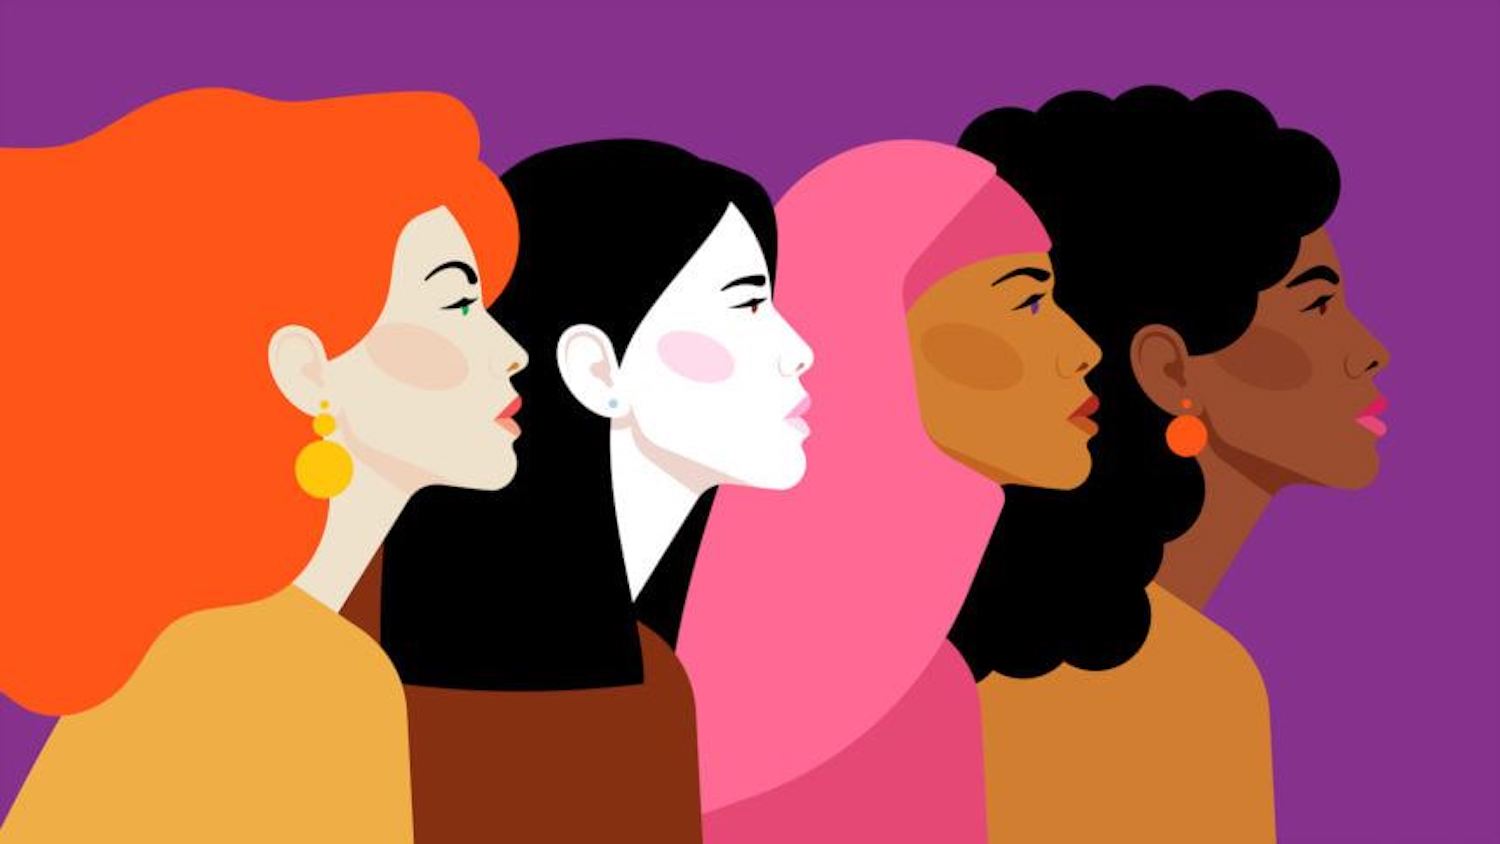 illustration of four women, one with red fluffy hair, one with black straight hair, one with a hijab, and one with curly balk hair